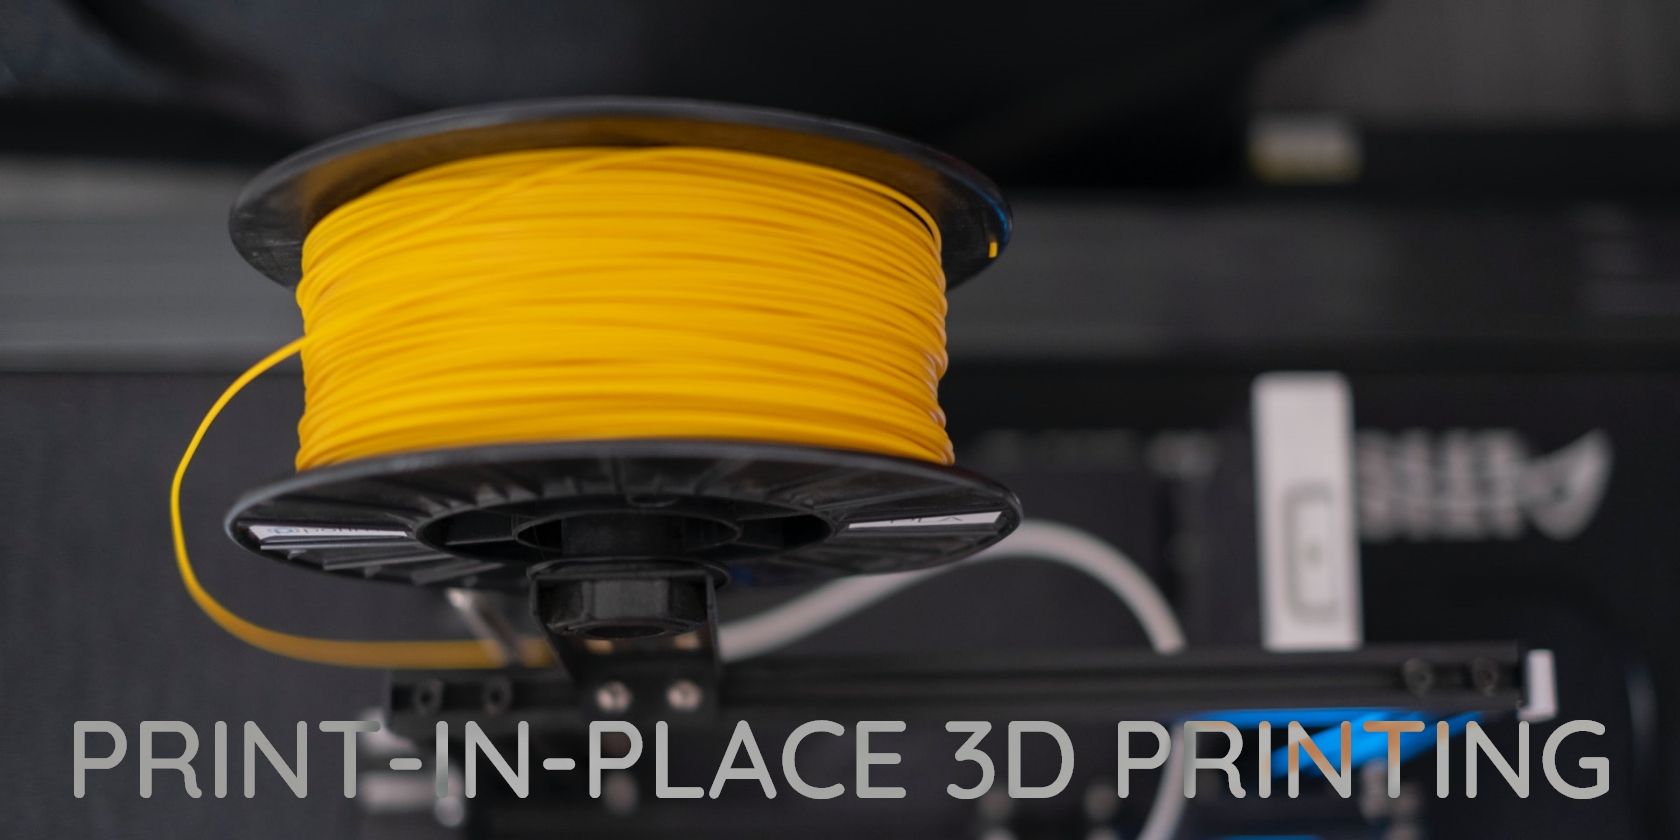 Learn Print-in-Place 3D Printing With These 7 Projects